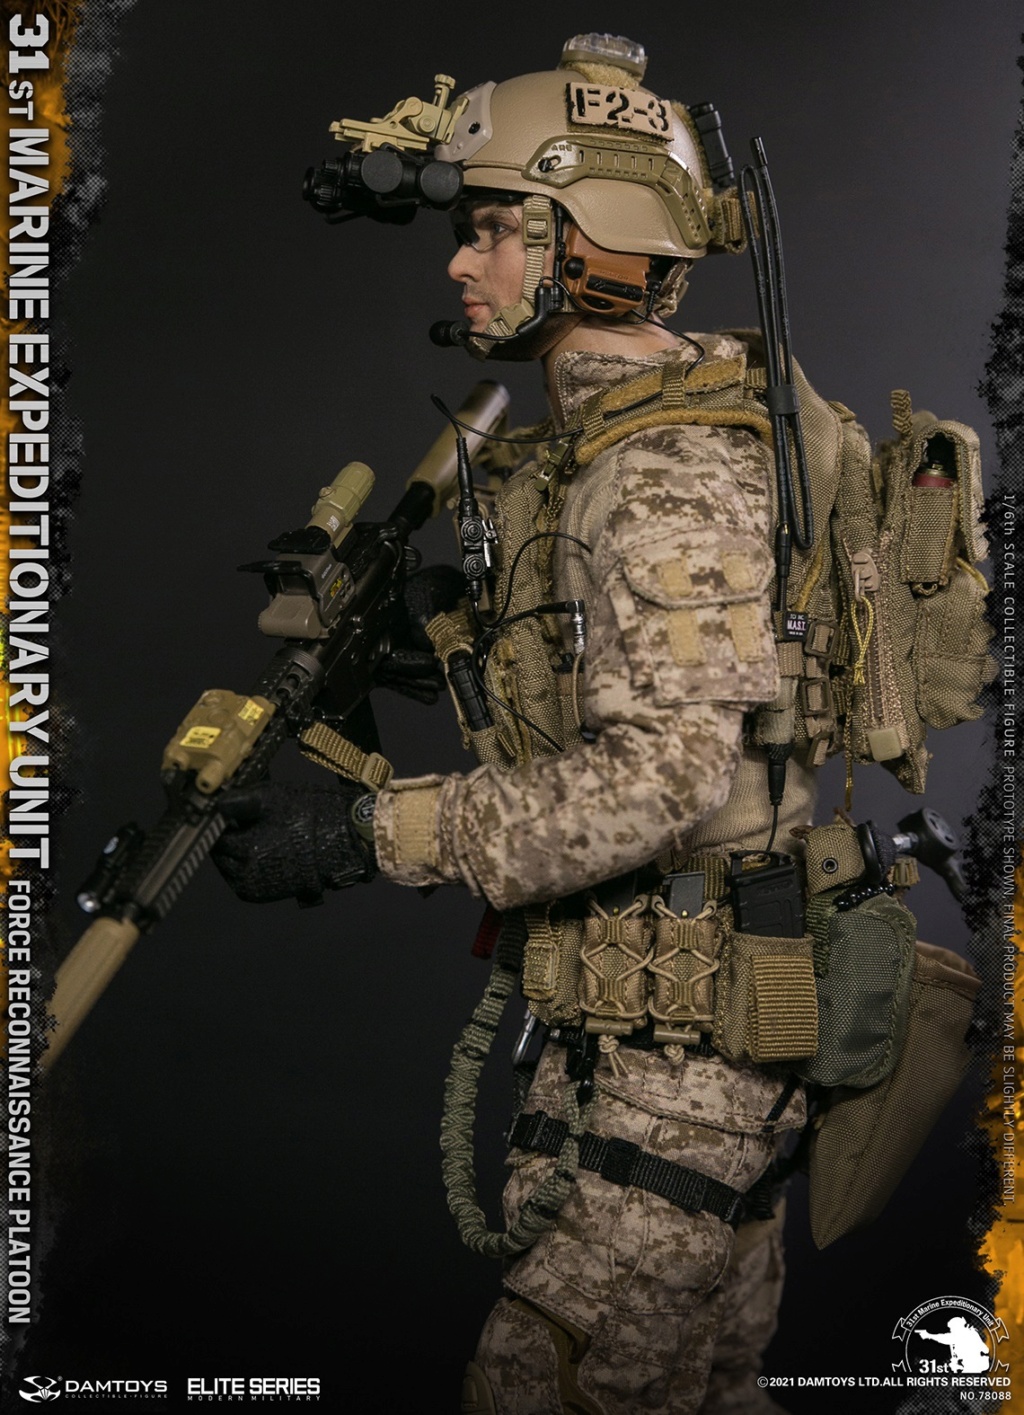 NEW PRODUCT: DAMTOYS: 1/6 U.S. Army 31st Marine Expeditionary Force Direct Reconnaissance Unit Reconnaissance Platoon s78088 14572410